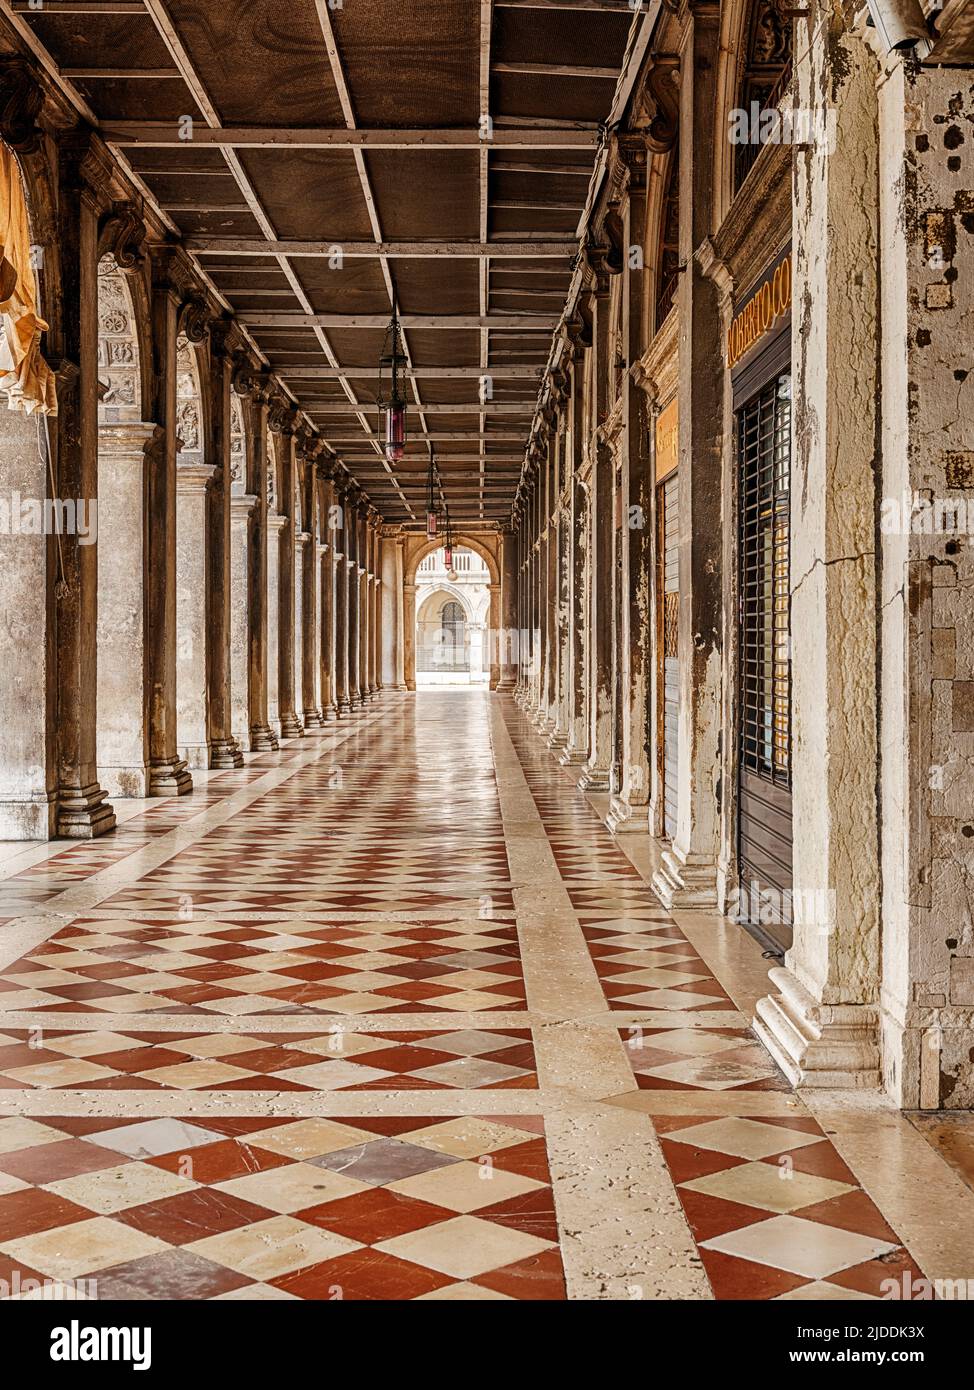 A long passage next to the Doge's Palace in Venice is covered in marble tiles between stone columns. Stock Photo